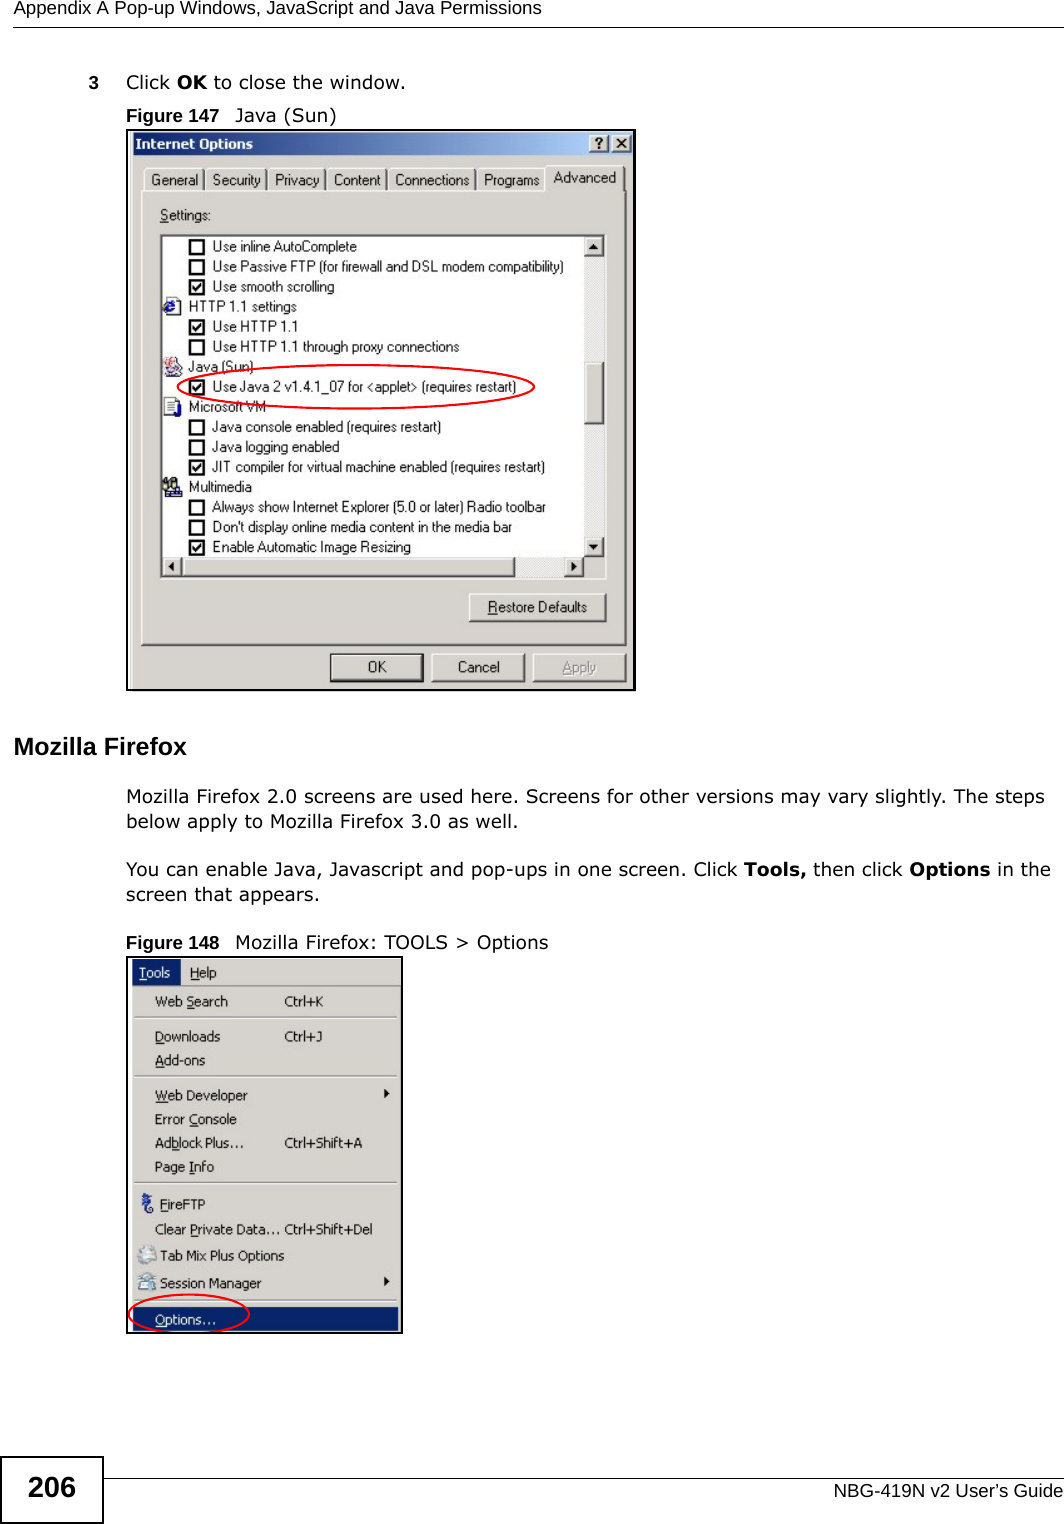 Appendix A Pop-up Windows, JavaScript and Java PermissionsNBG-419N v2 User’s Guide2063Click OK to close the window.Figure 147   Java (Sun)Mozilla FirefoxMozilla Firefox 2.0 screens are used here. Screens for other versions may vary slightly. The steps below apply to Mozilla Firefox 3.0 as well.You can enable Java, Javascript and pop-ups in one screen. Click Tools, then click Options in the screen that appears.Figure 148   Mozilla Firefox: TOOLS &gt; Options